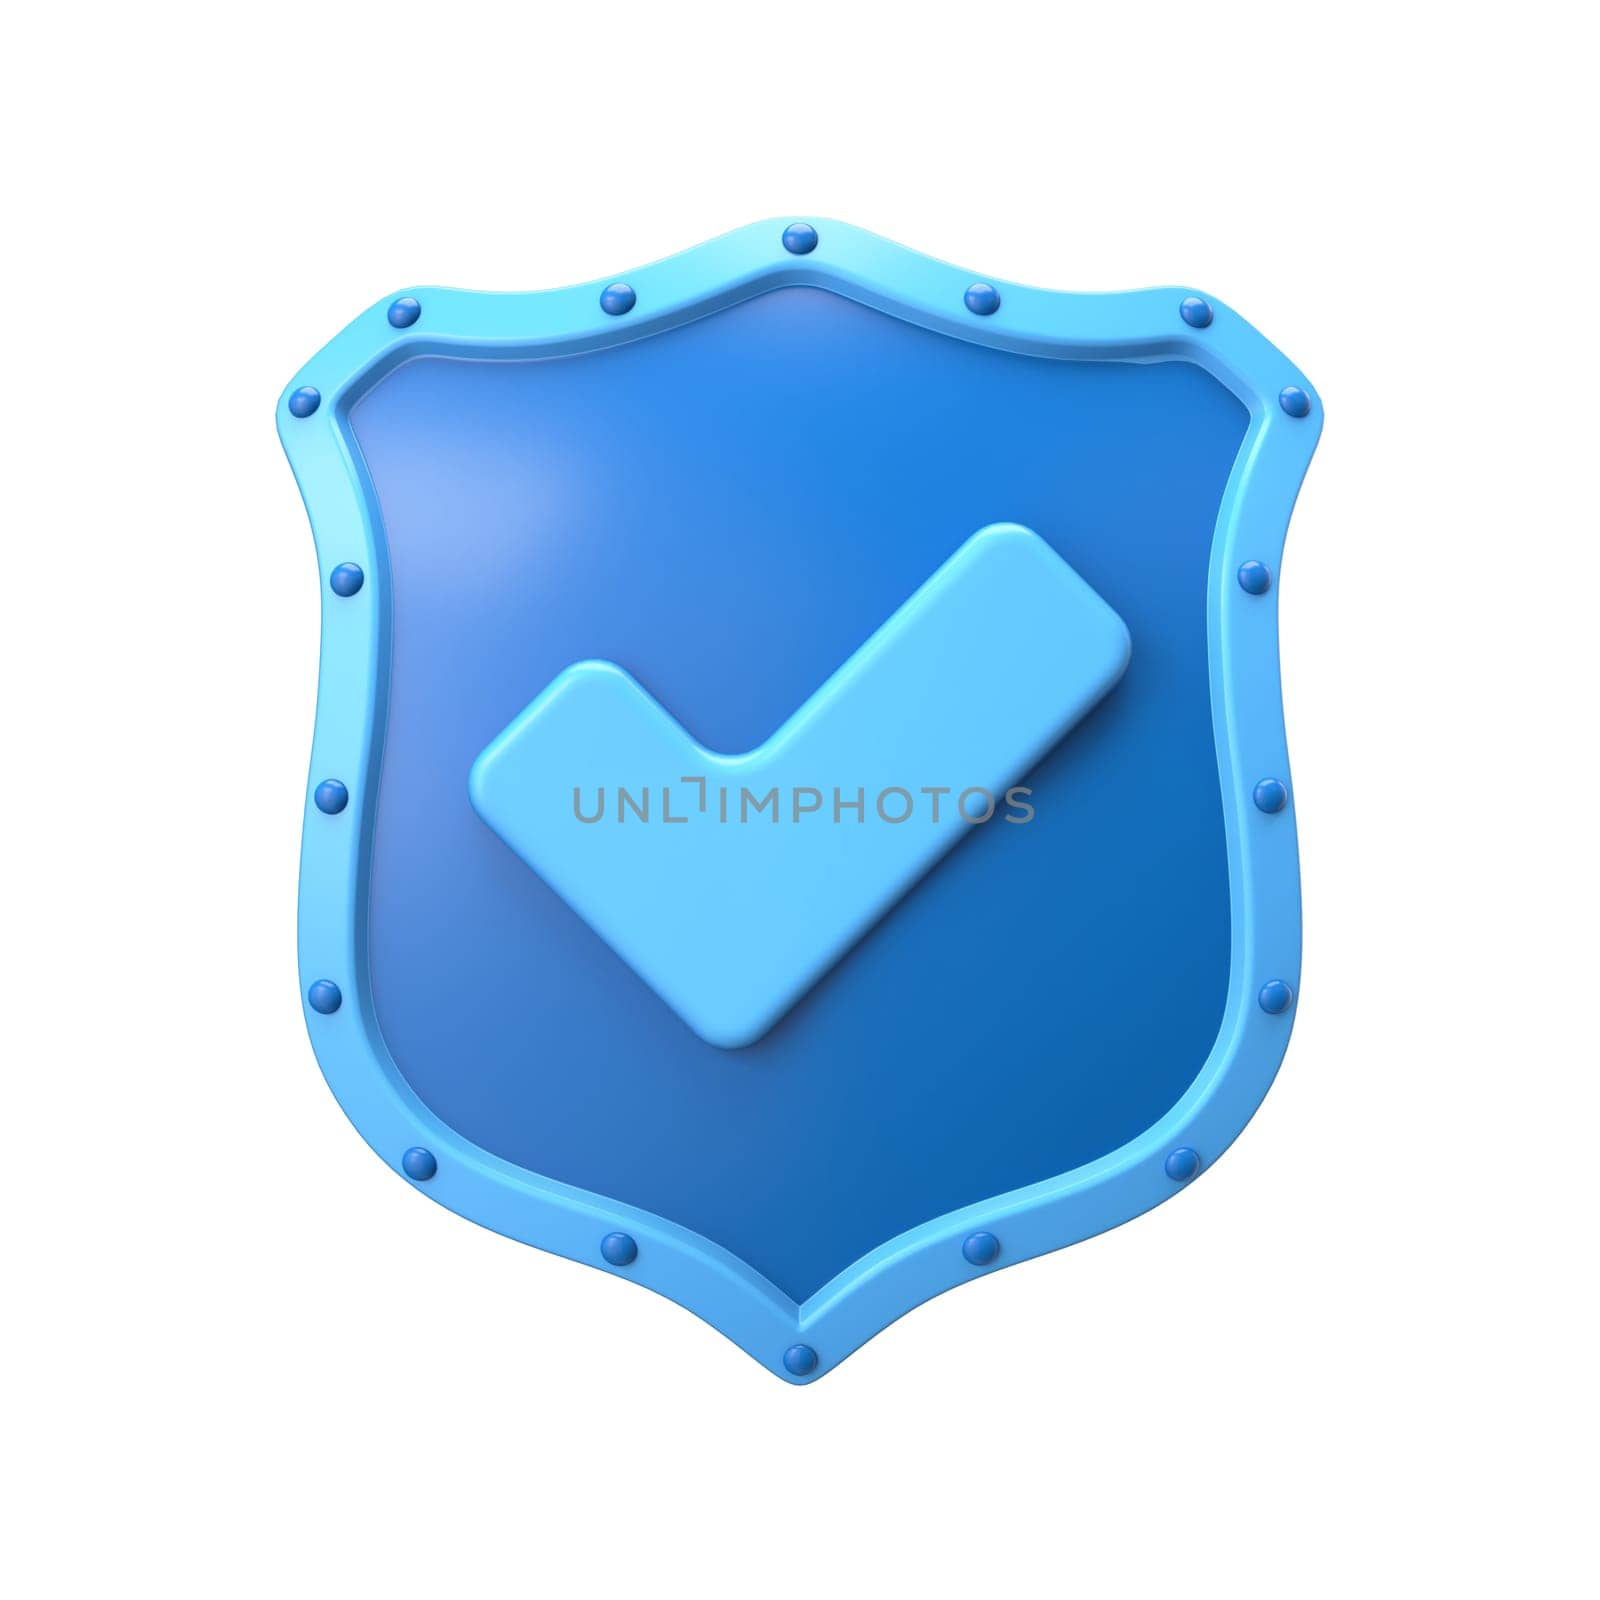 Blue shield with rivets and check mark 3D rendering illustration isolated on white background